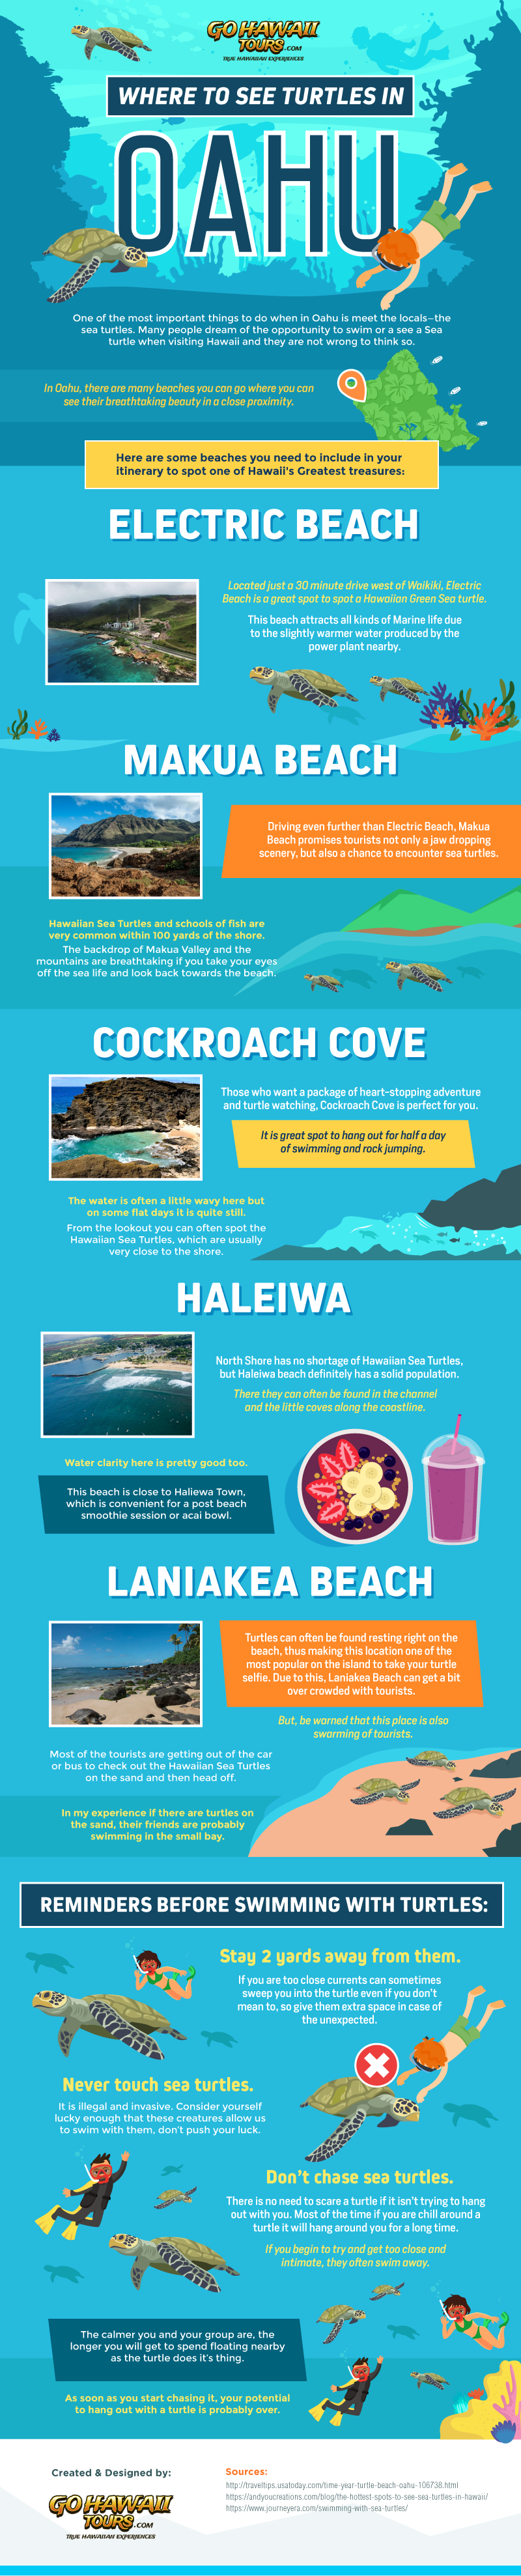 Where To See Turtles In Oahu -Infographic Image